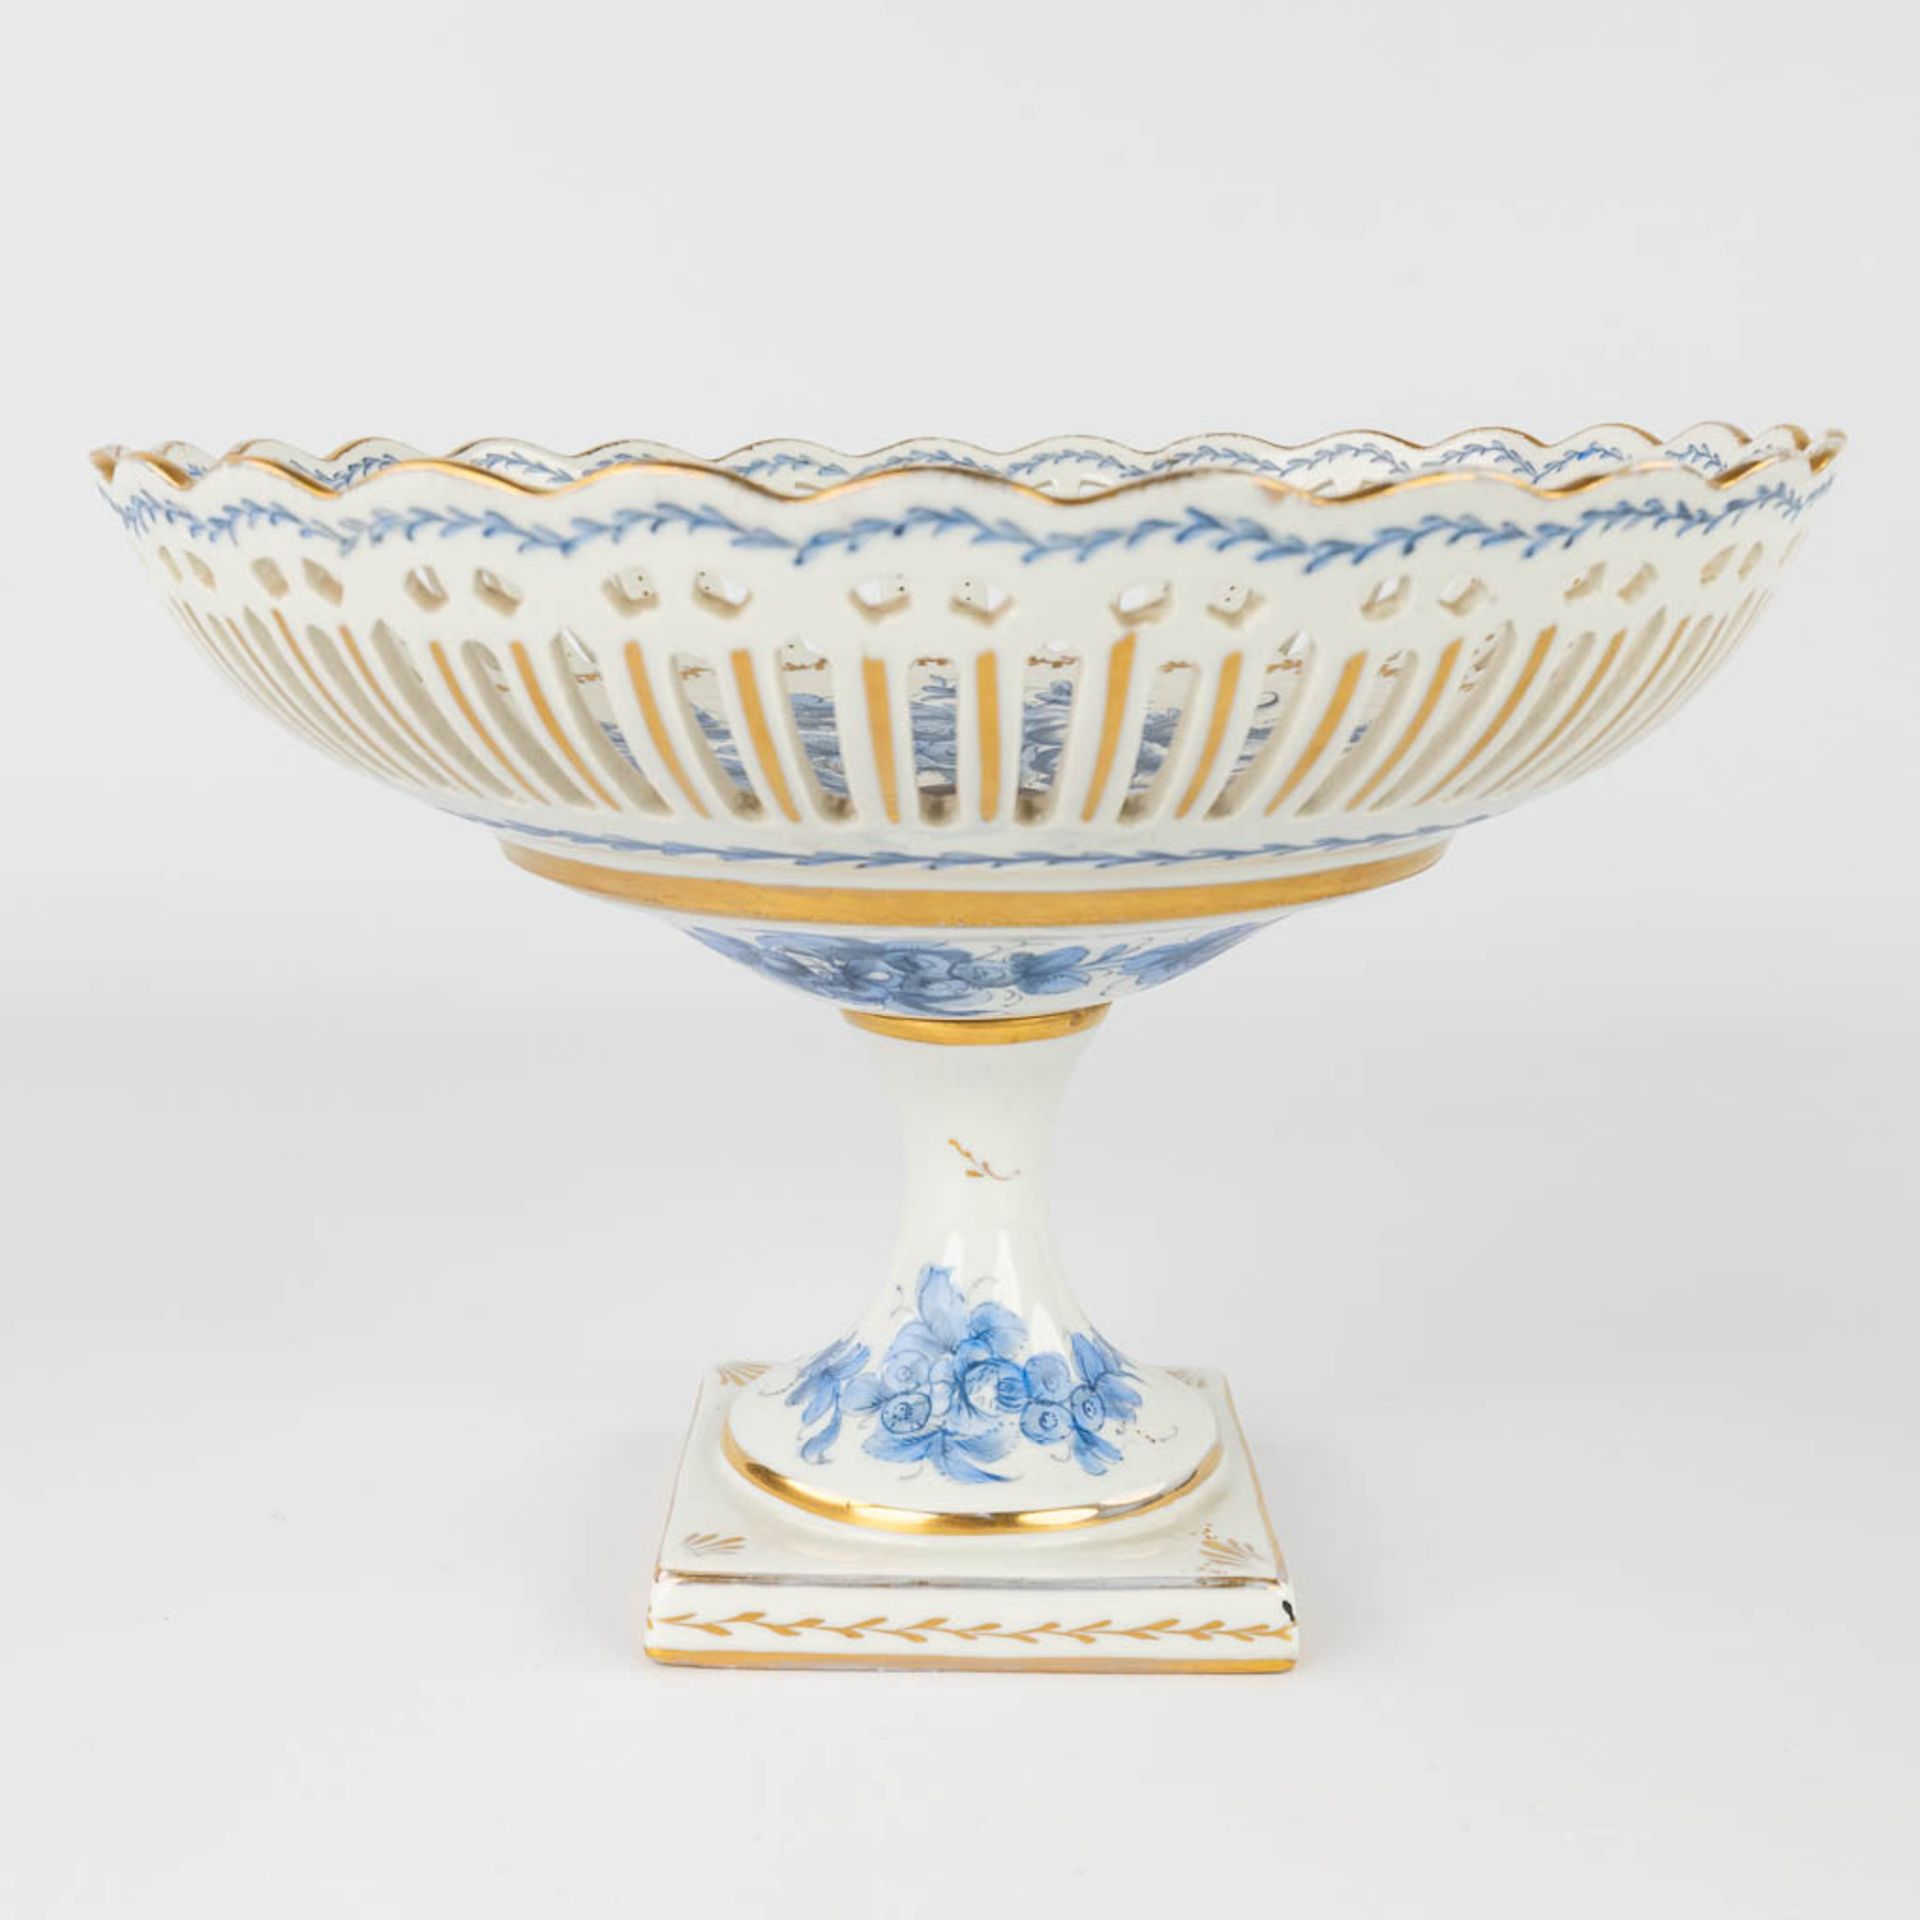 A large collection of porcelain items and table accessories of multiple marks. 19th and 20th C. (H:2 - Image 34 of 36